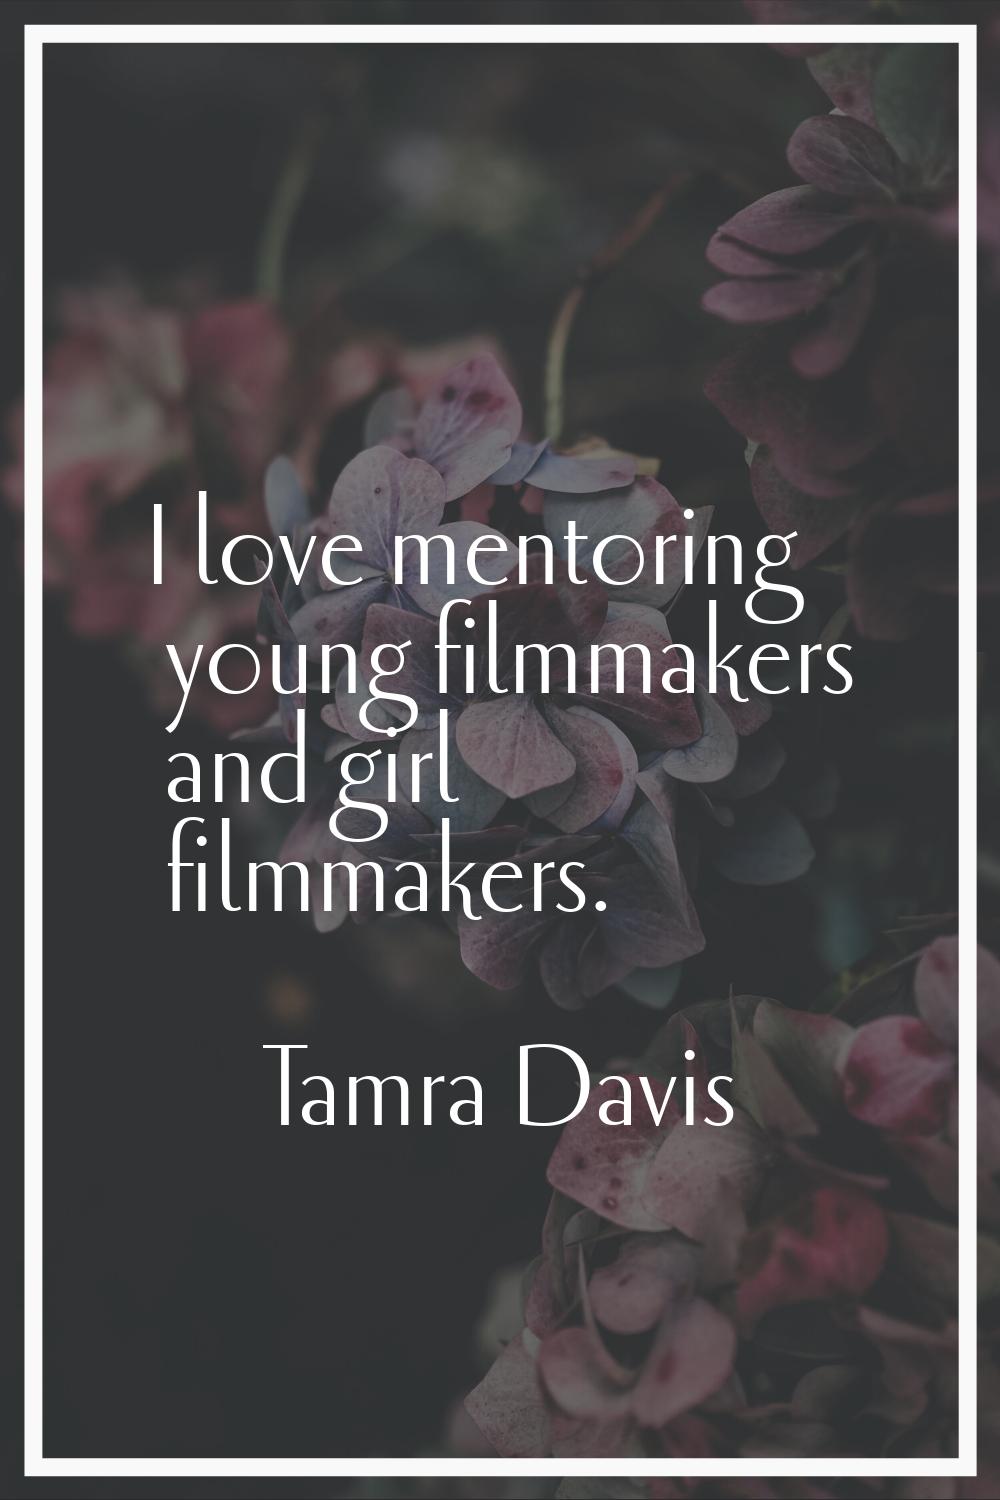 I love mentoring young filmmakers and girl filmmakers.